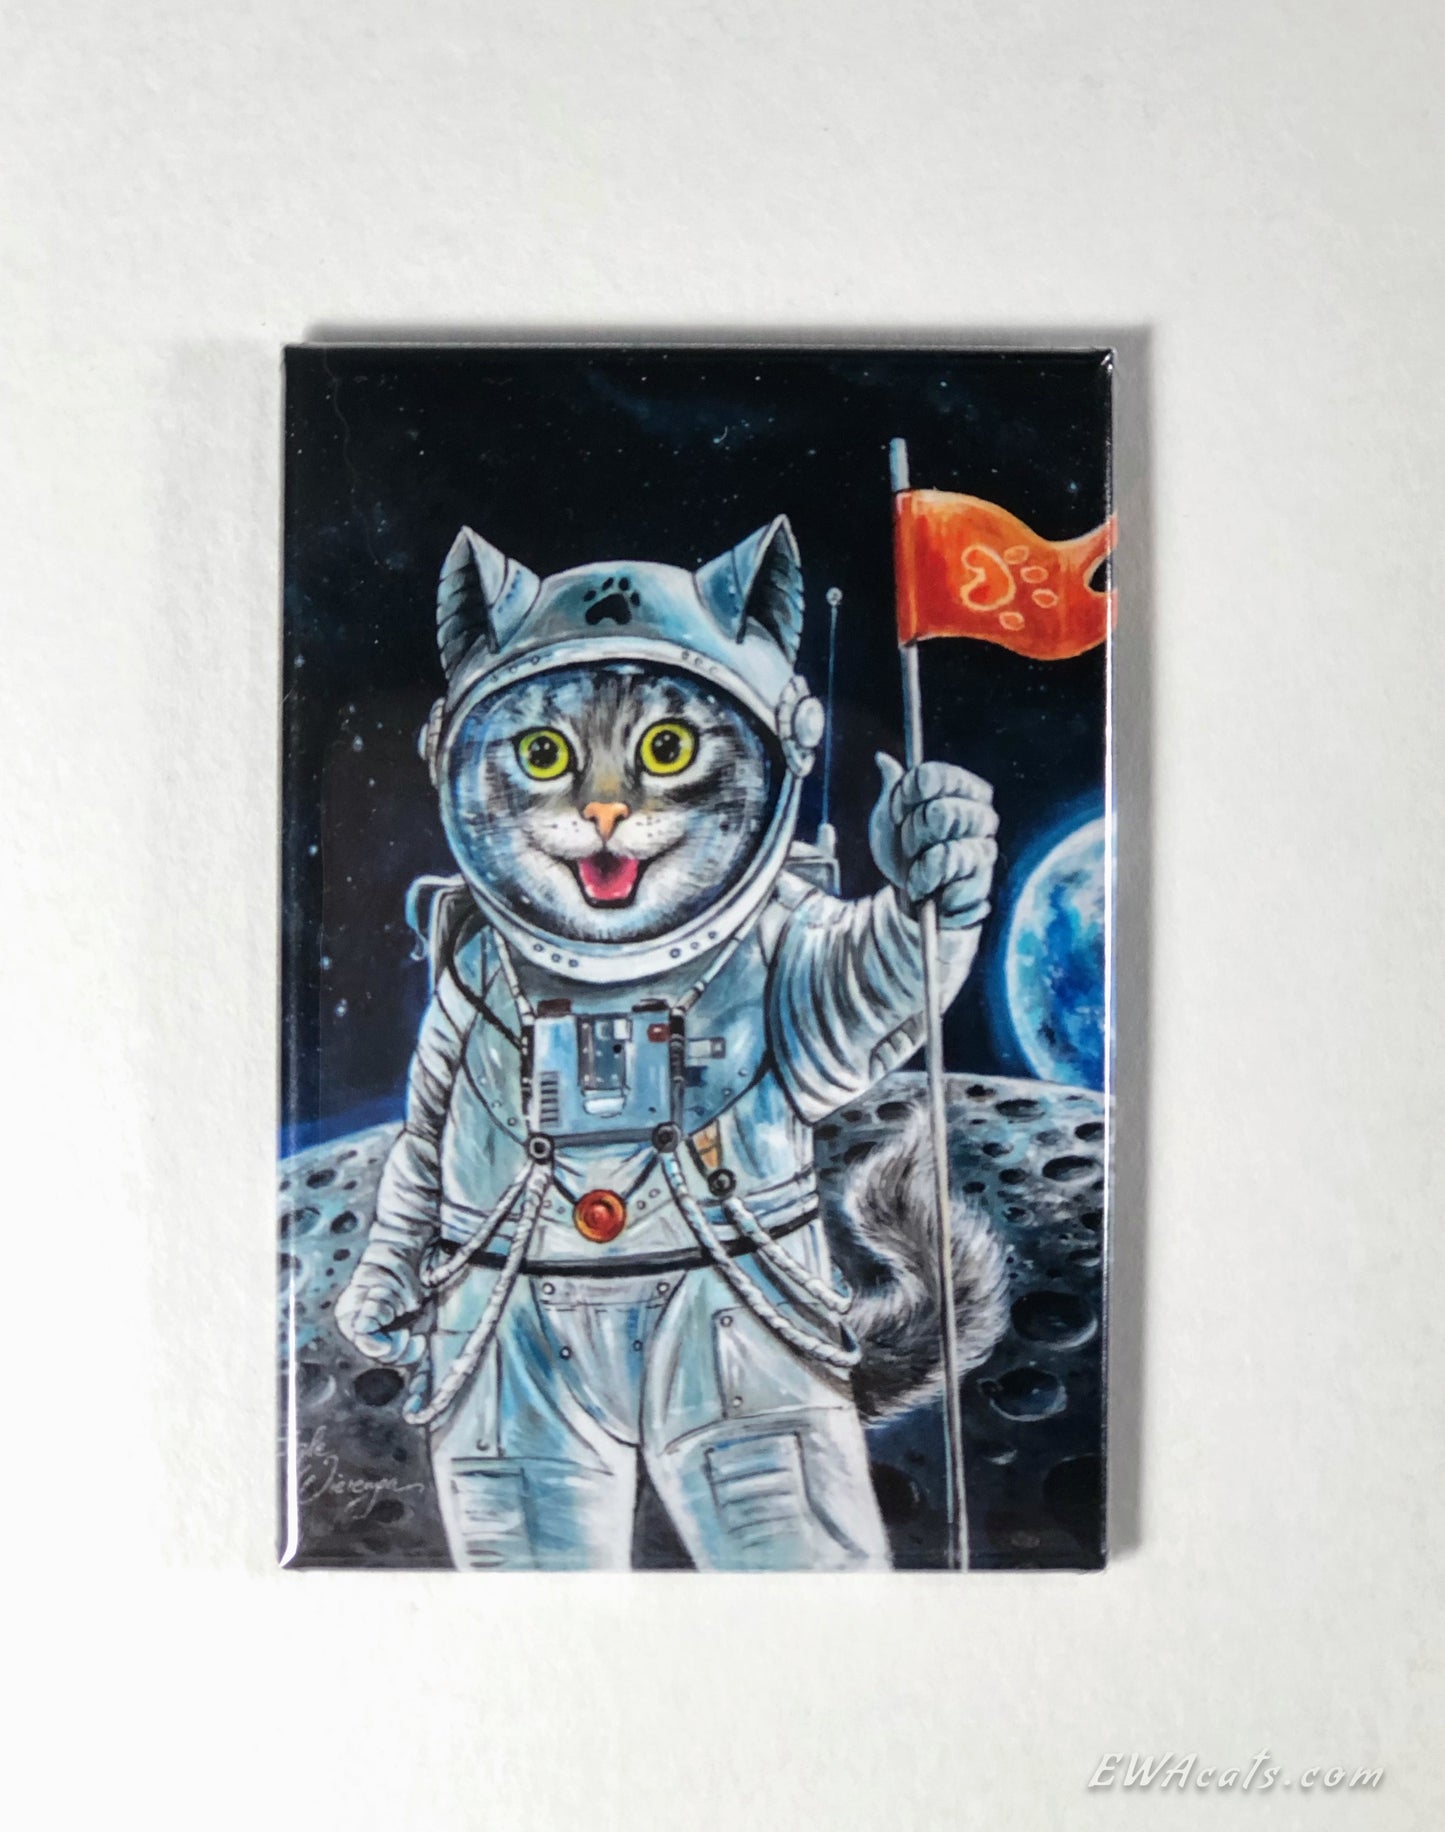 MAGNET 2"x 3" Rectangle "First Cat on the Moon"